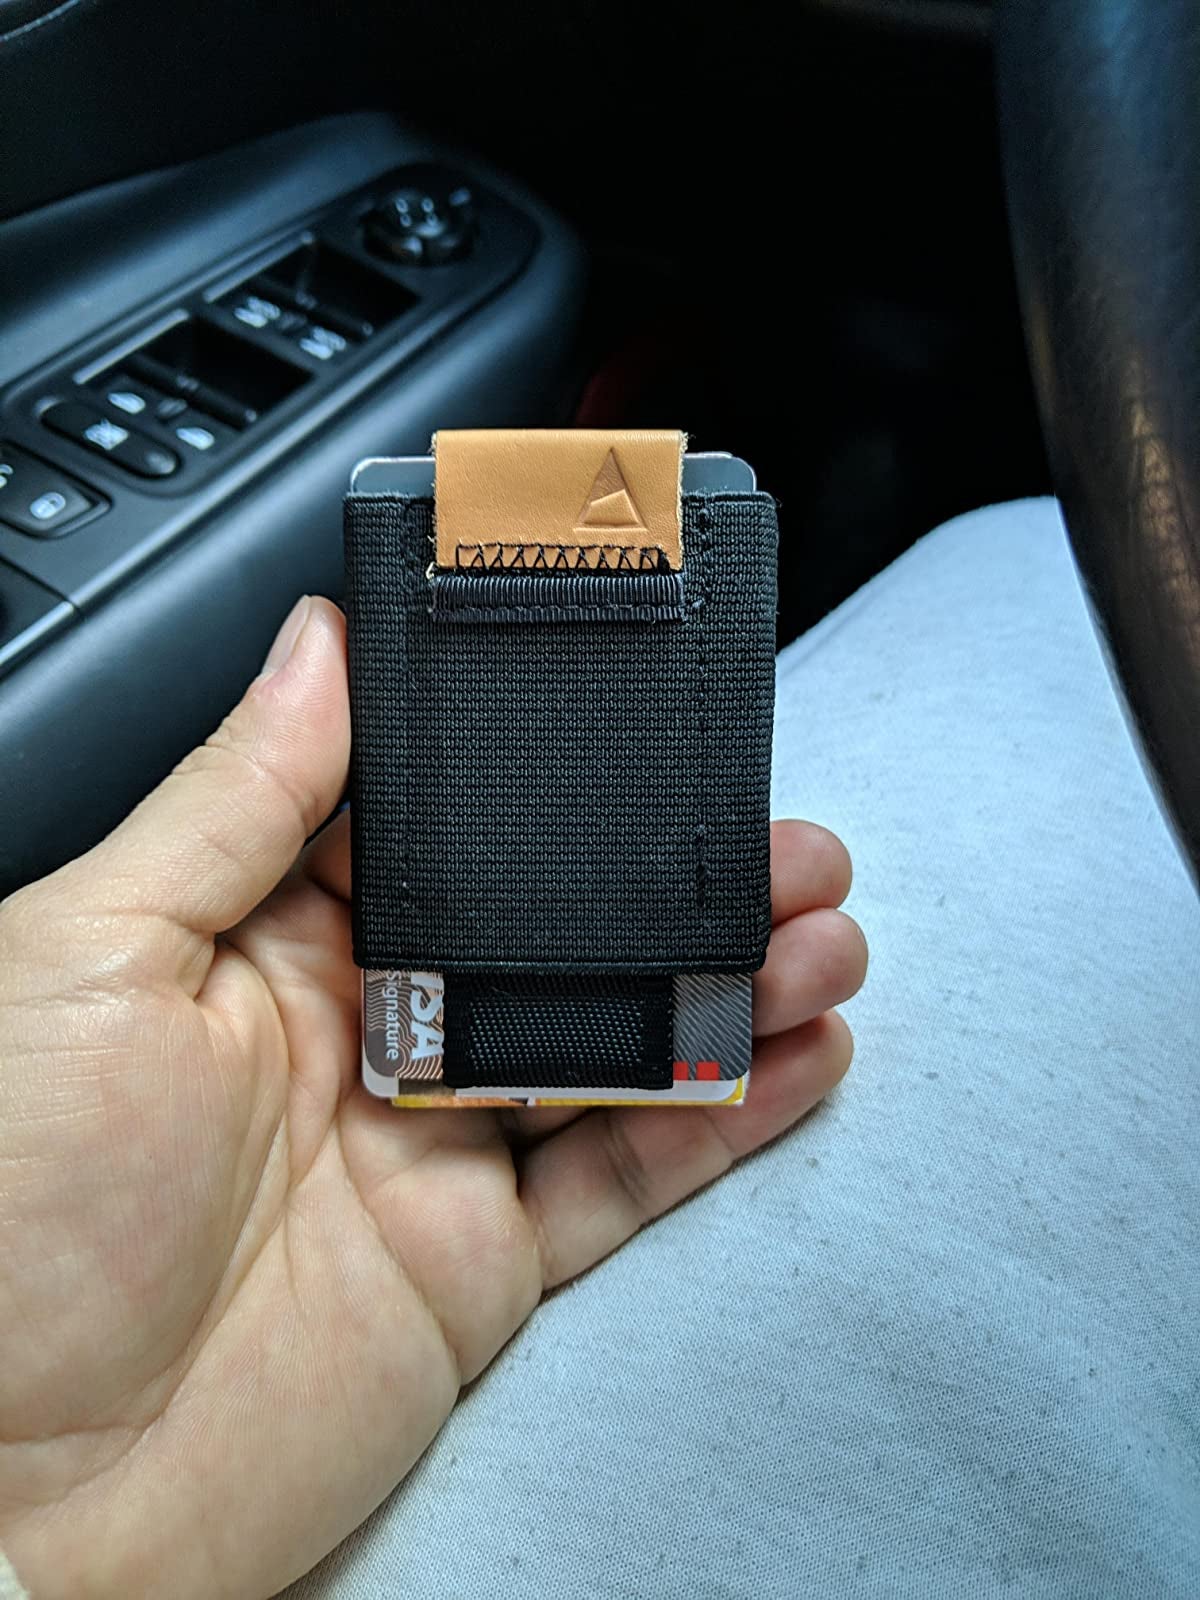 What do you guys think is the best card holder on the market for